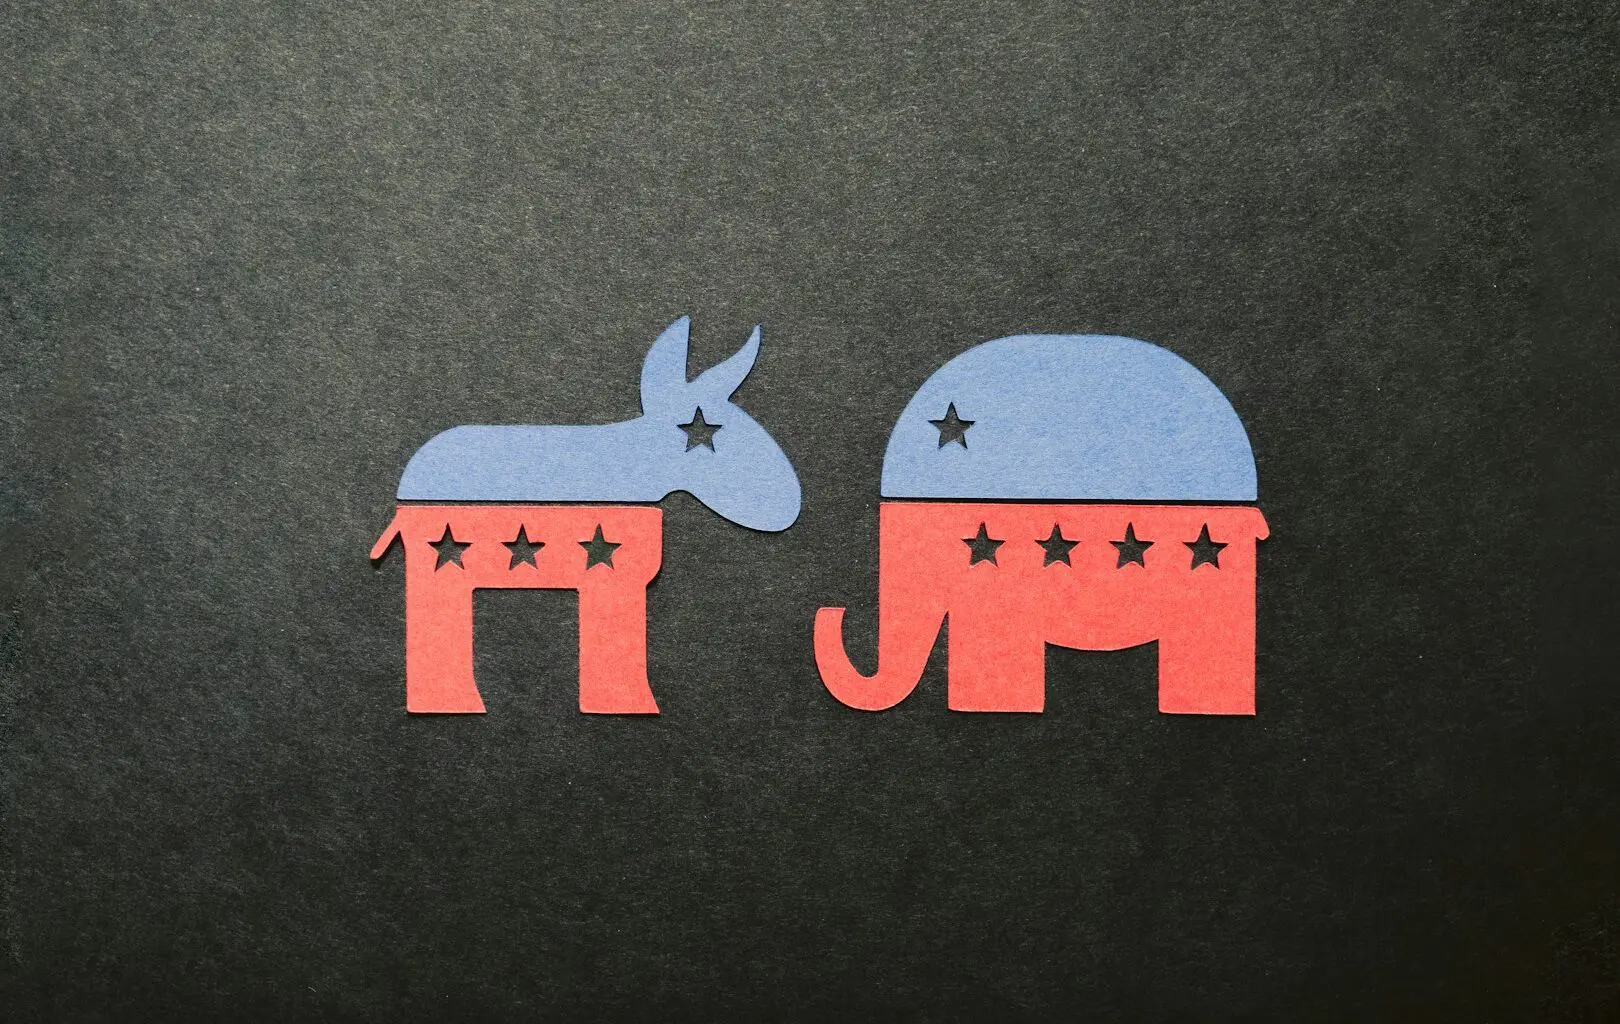 A picture of an elephant and a donkey, symbolising the United States parties in terms of voting.